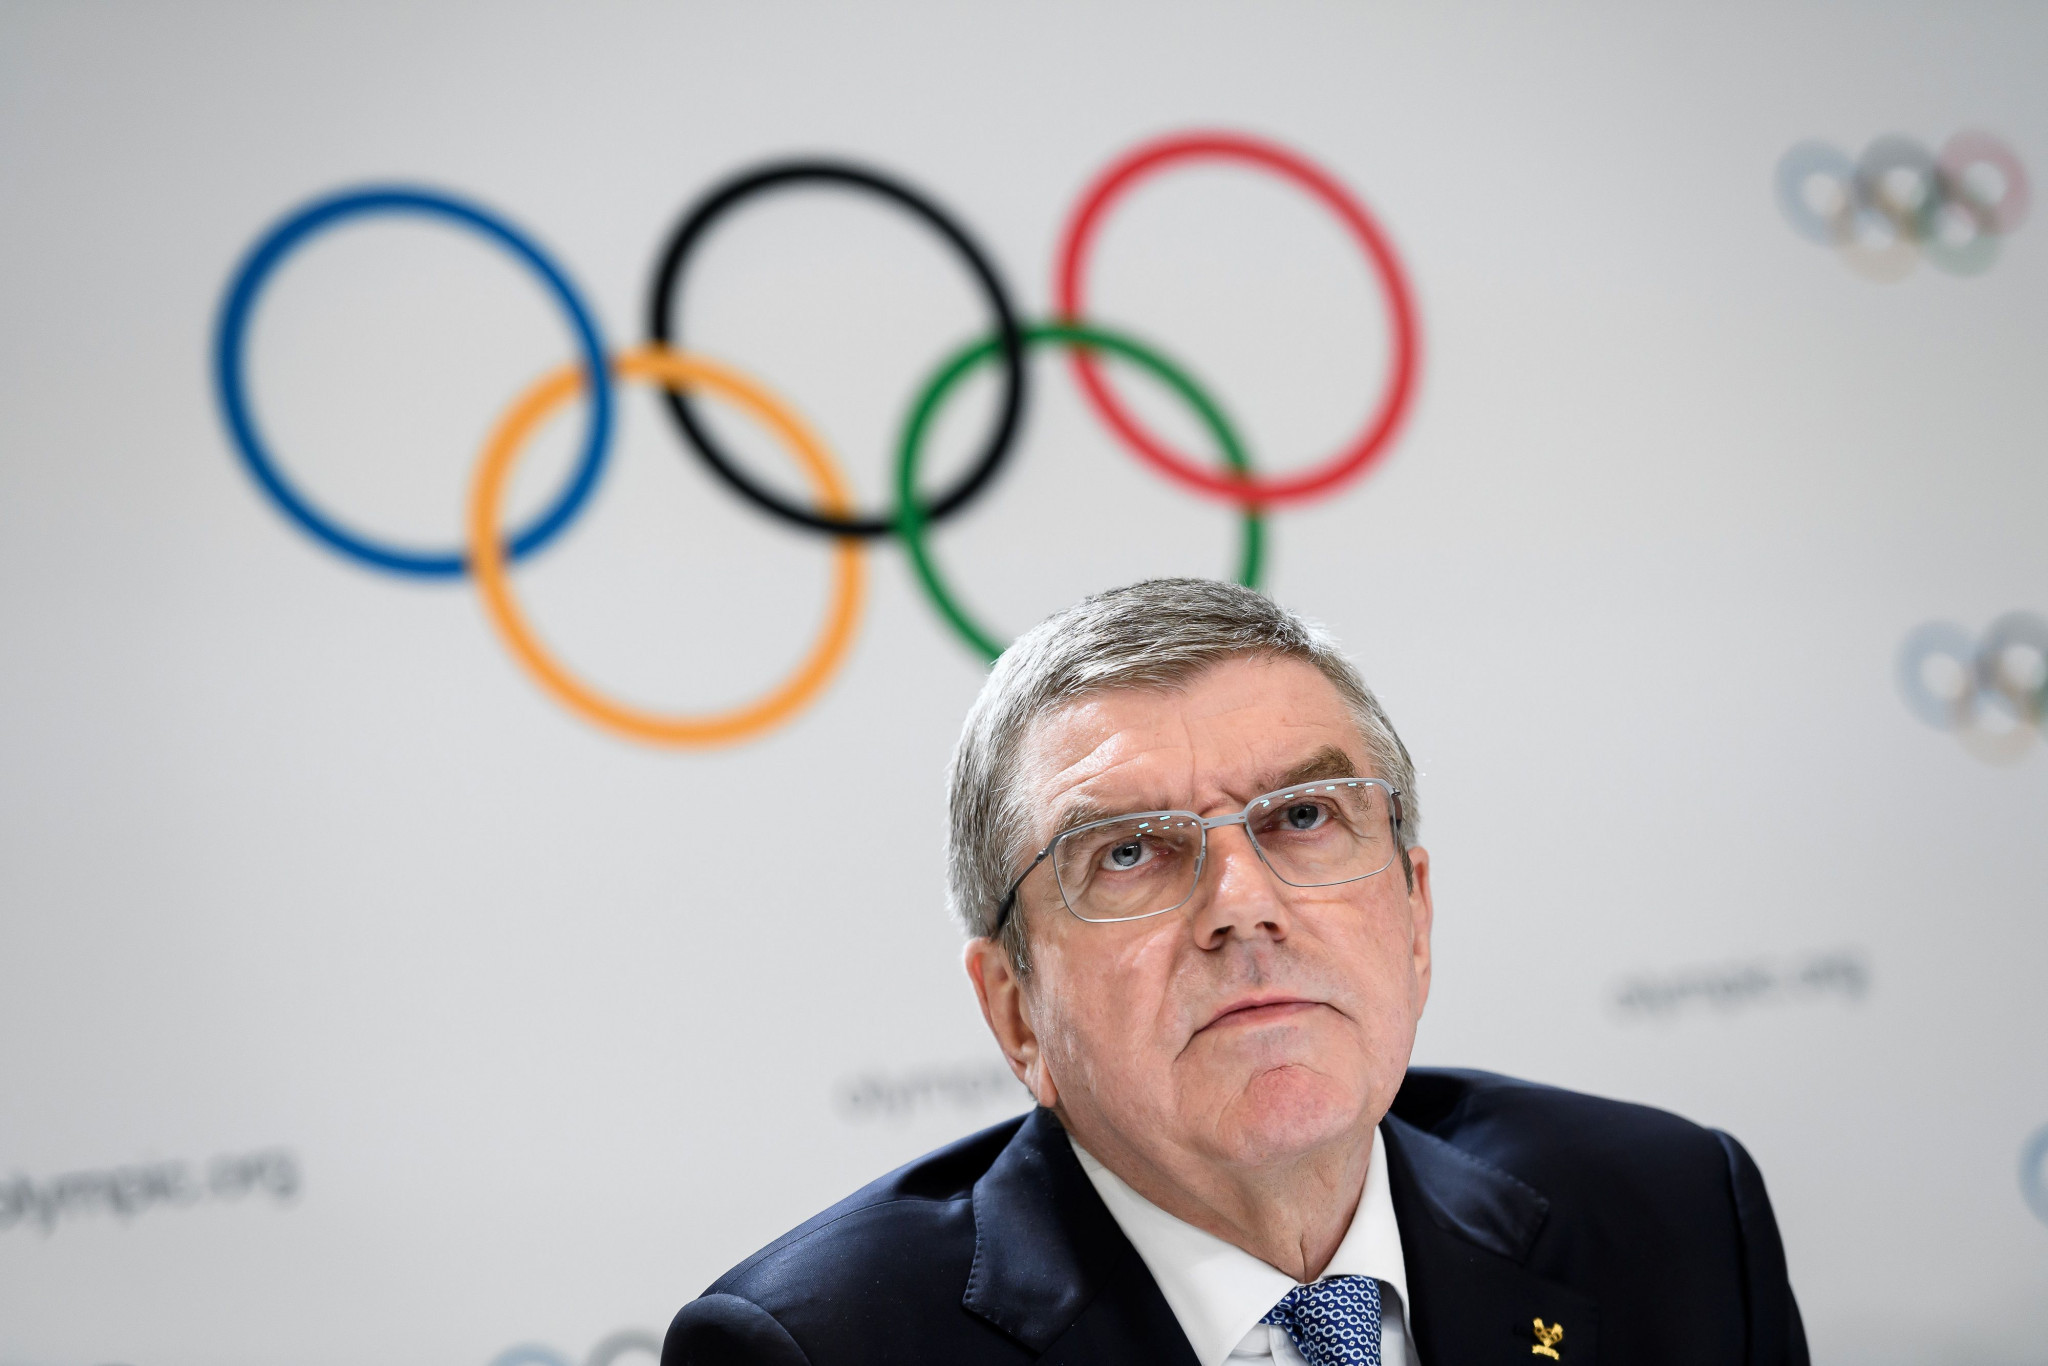 IOC President Thomas Bach has claimed climate change has led to a reduced number of candidates bidding for the Winter Olympics, with ski resorts instead opting to prioritise investment in summer sports ©Getty Images